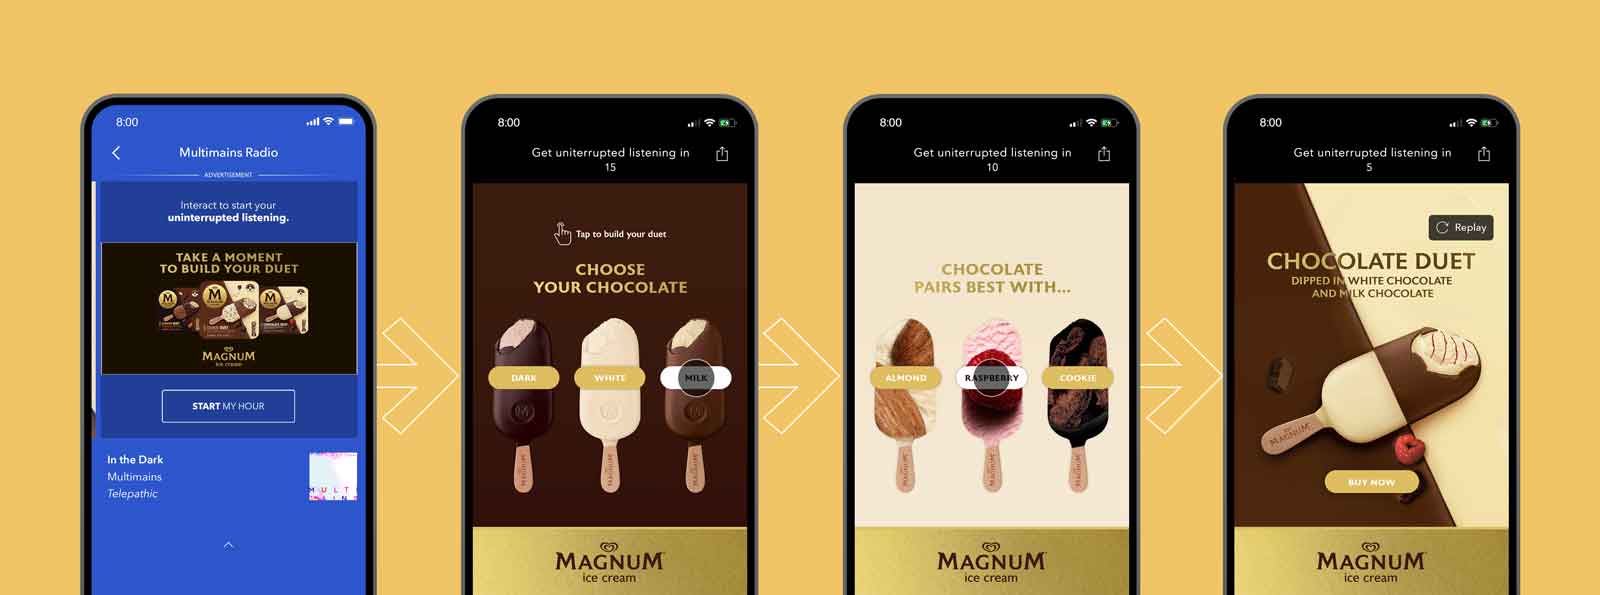 Magnum Gamified Ad